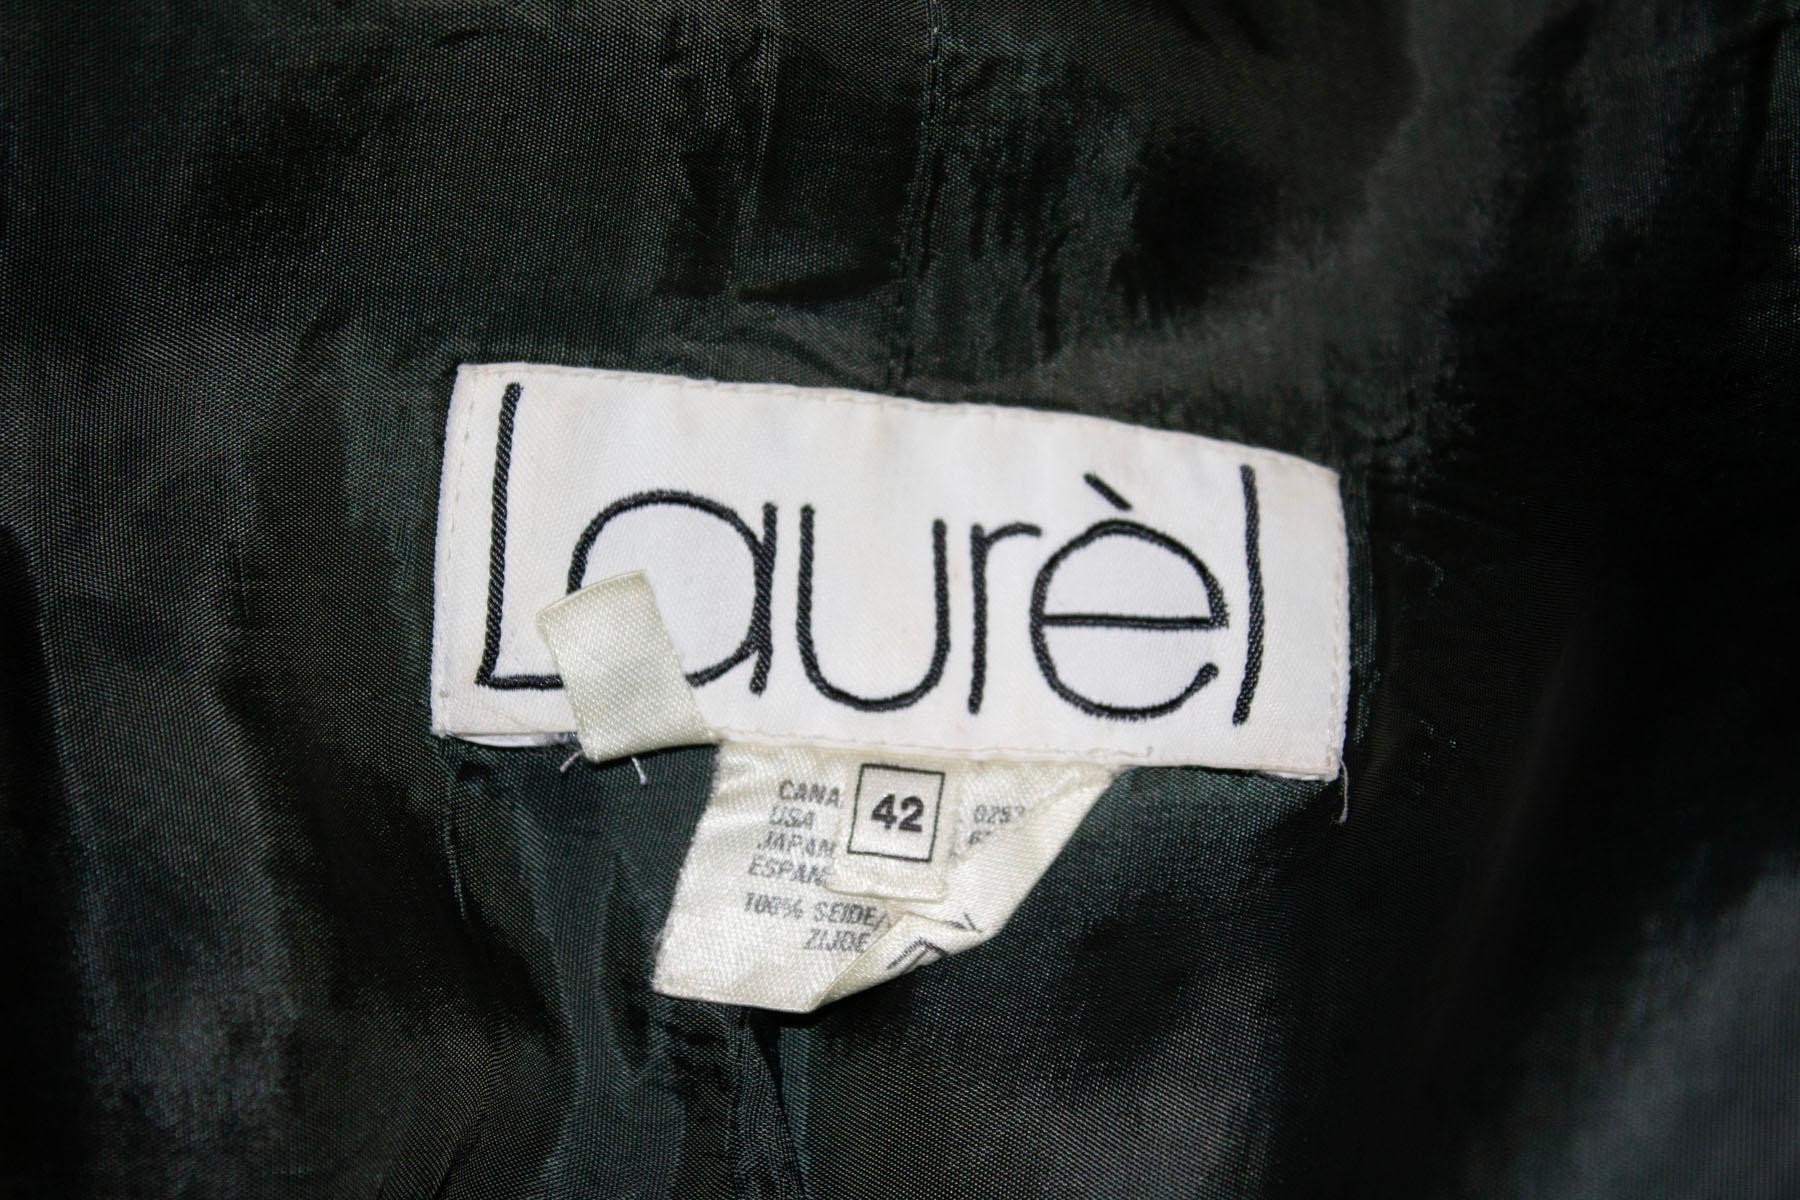 A wonderful  indulgent vintage silk jacket by Laurel. 
In a pretty grey/green colour, the jacket has a front zip front opening, with two large patch pockets. It has an elasticated waist, single button cuffs and is lined in silk. 
Measurements: Bust